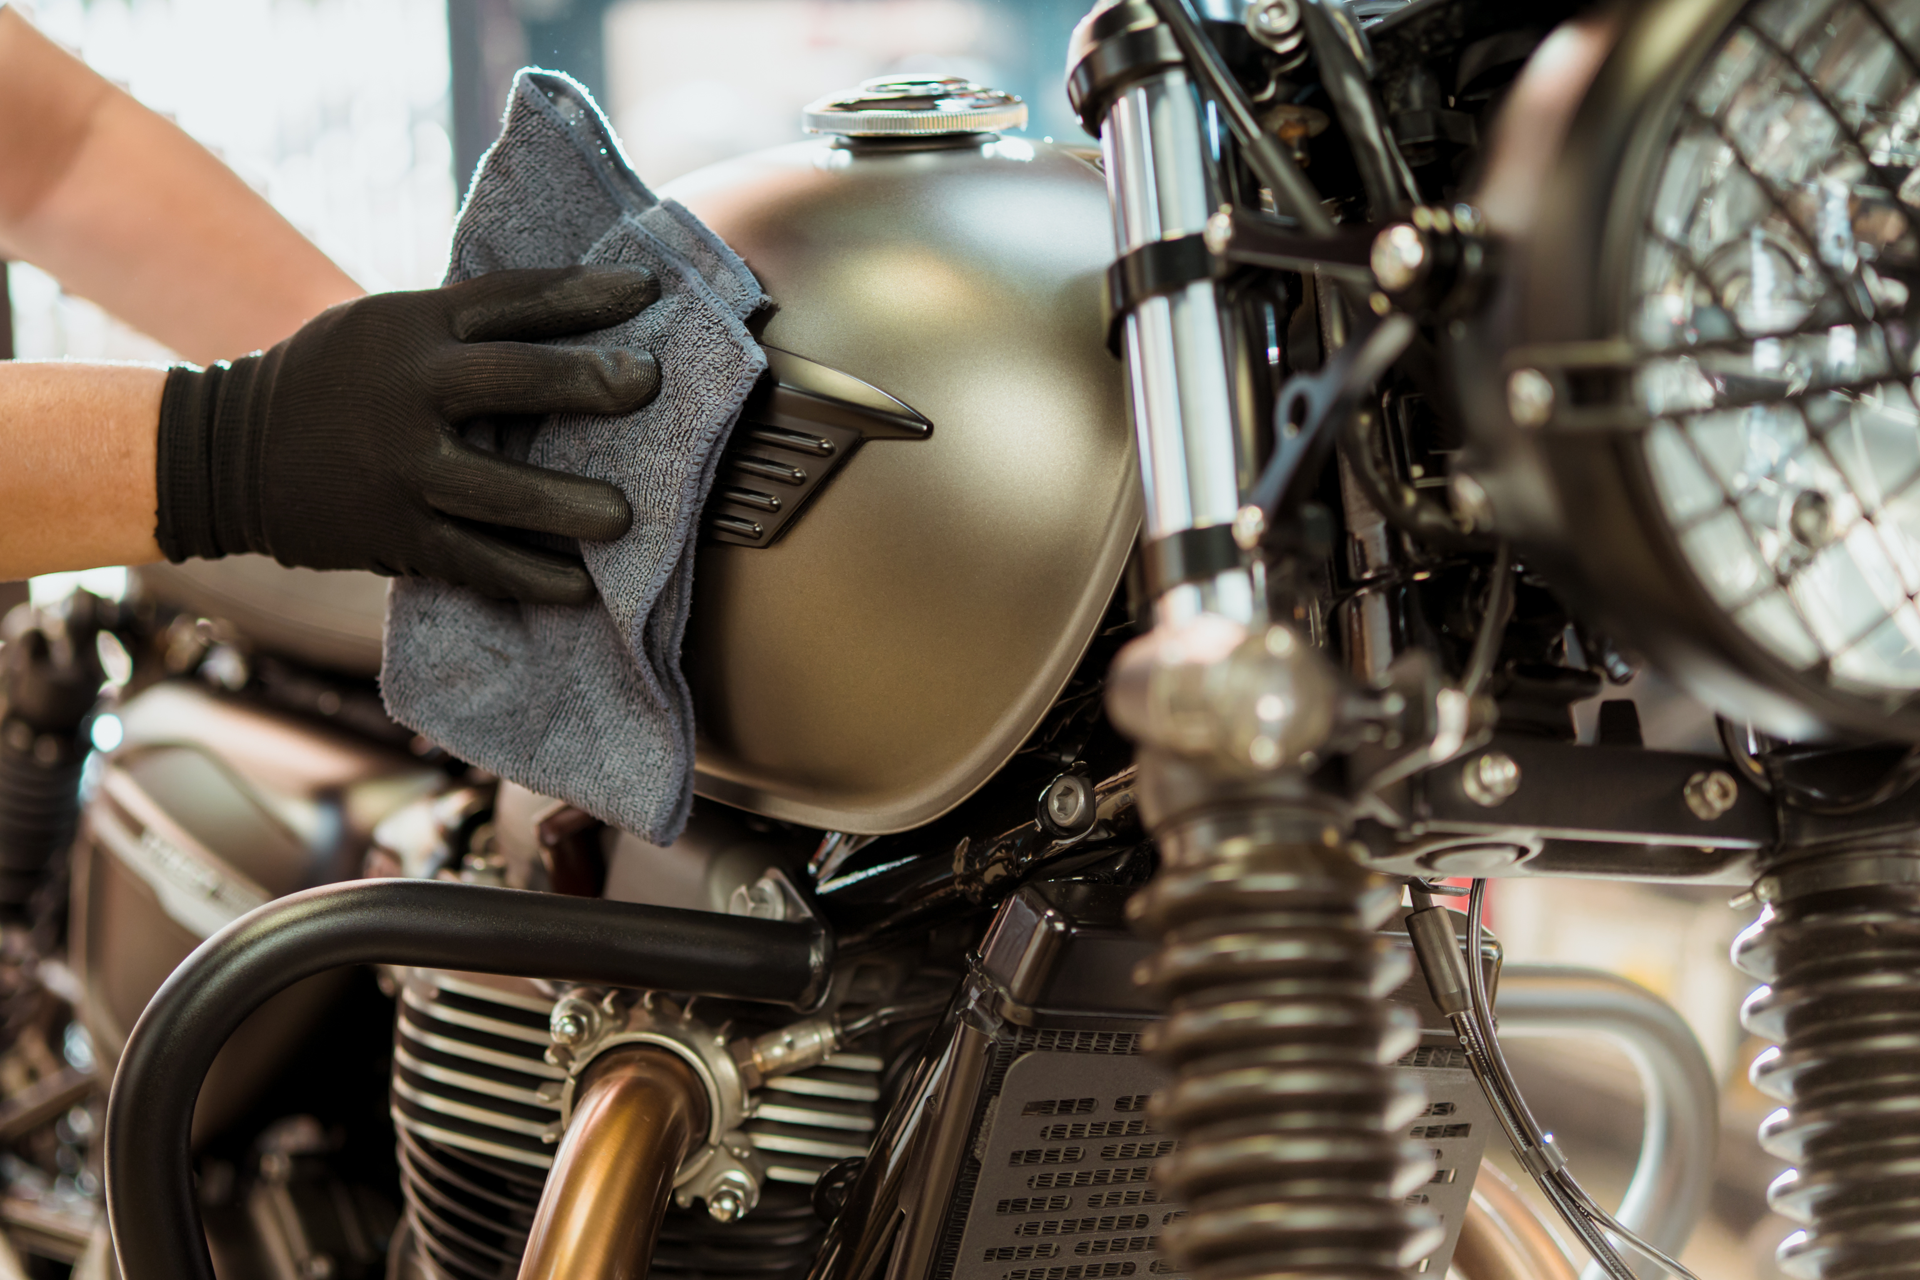 Motorcycle being polished and cleaned